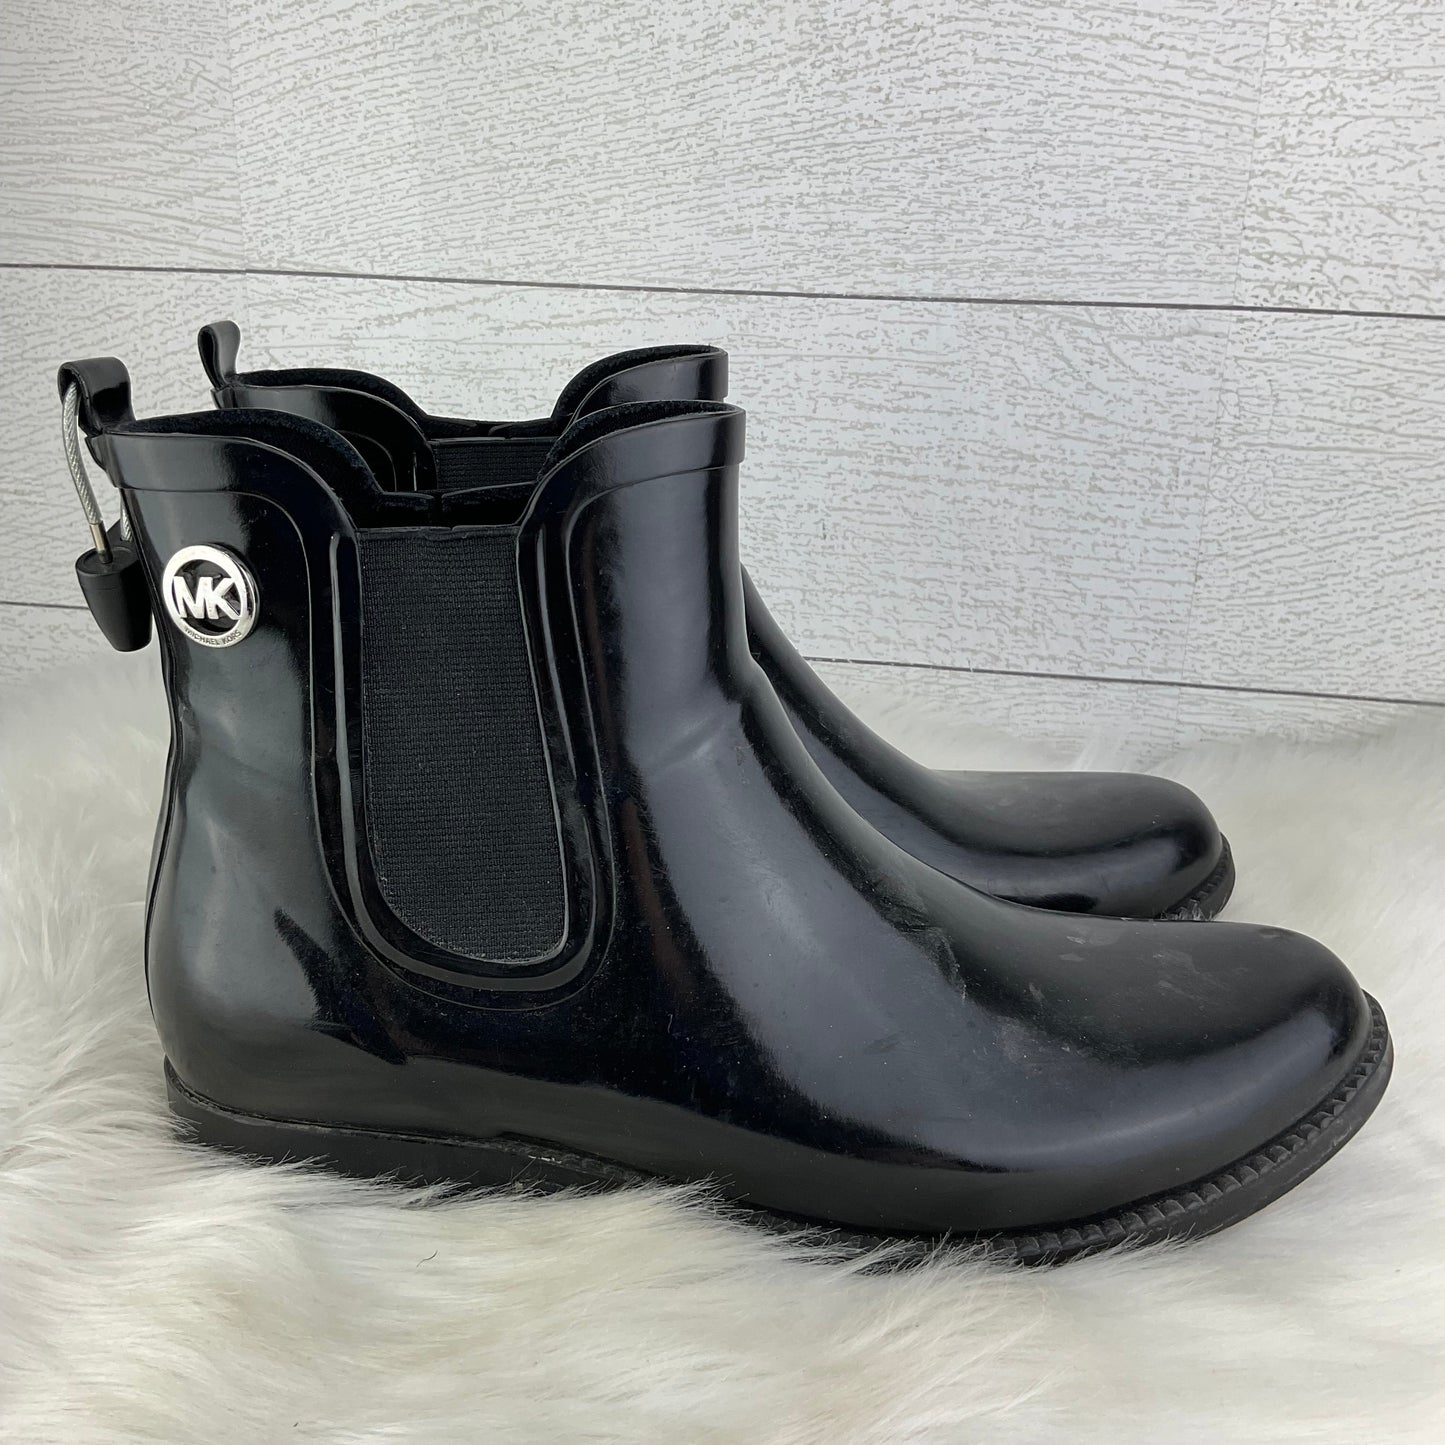 Boots Designer By Michael Kors  Size: 9